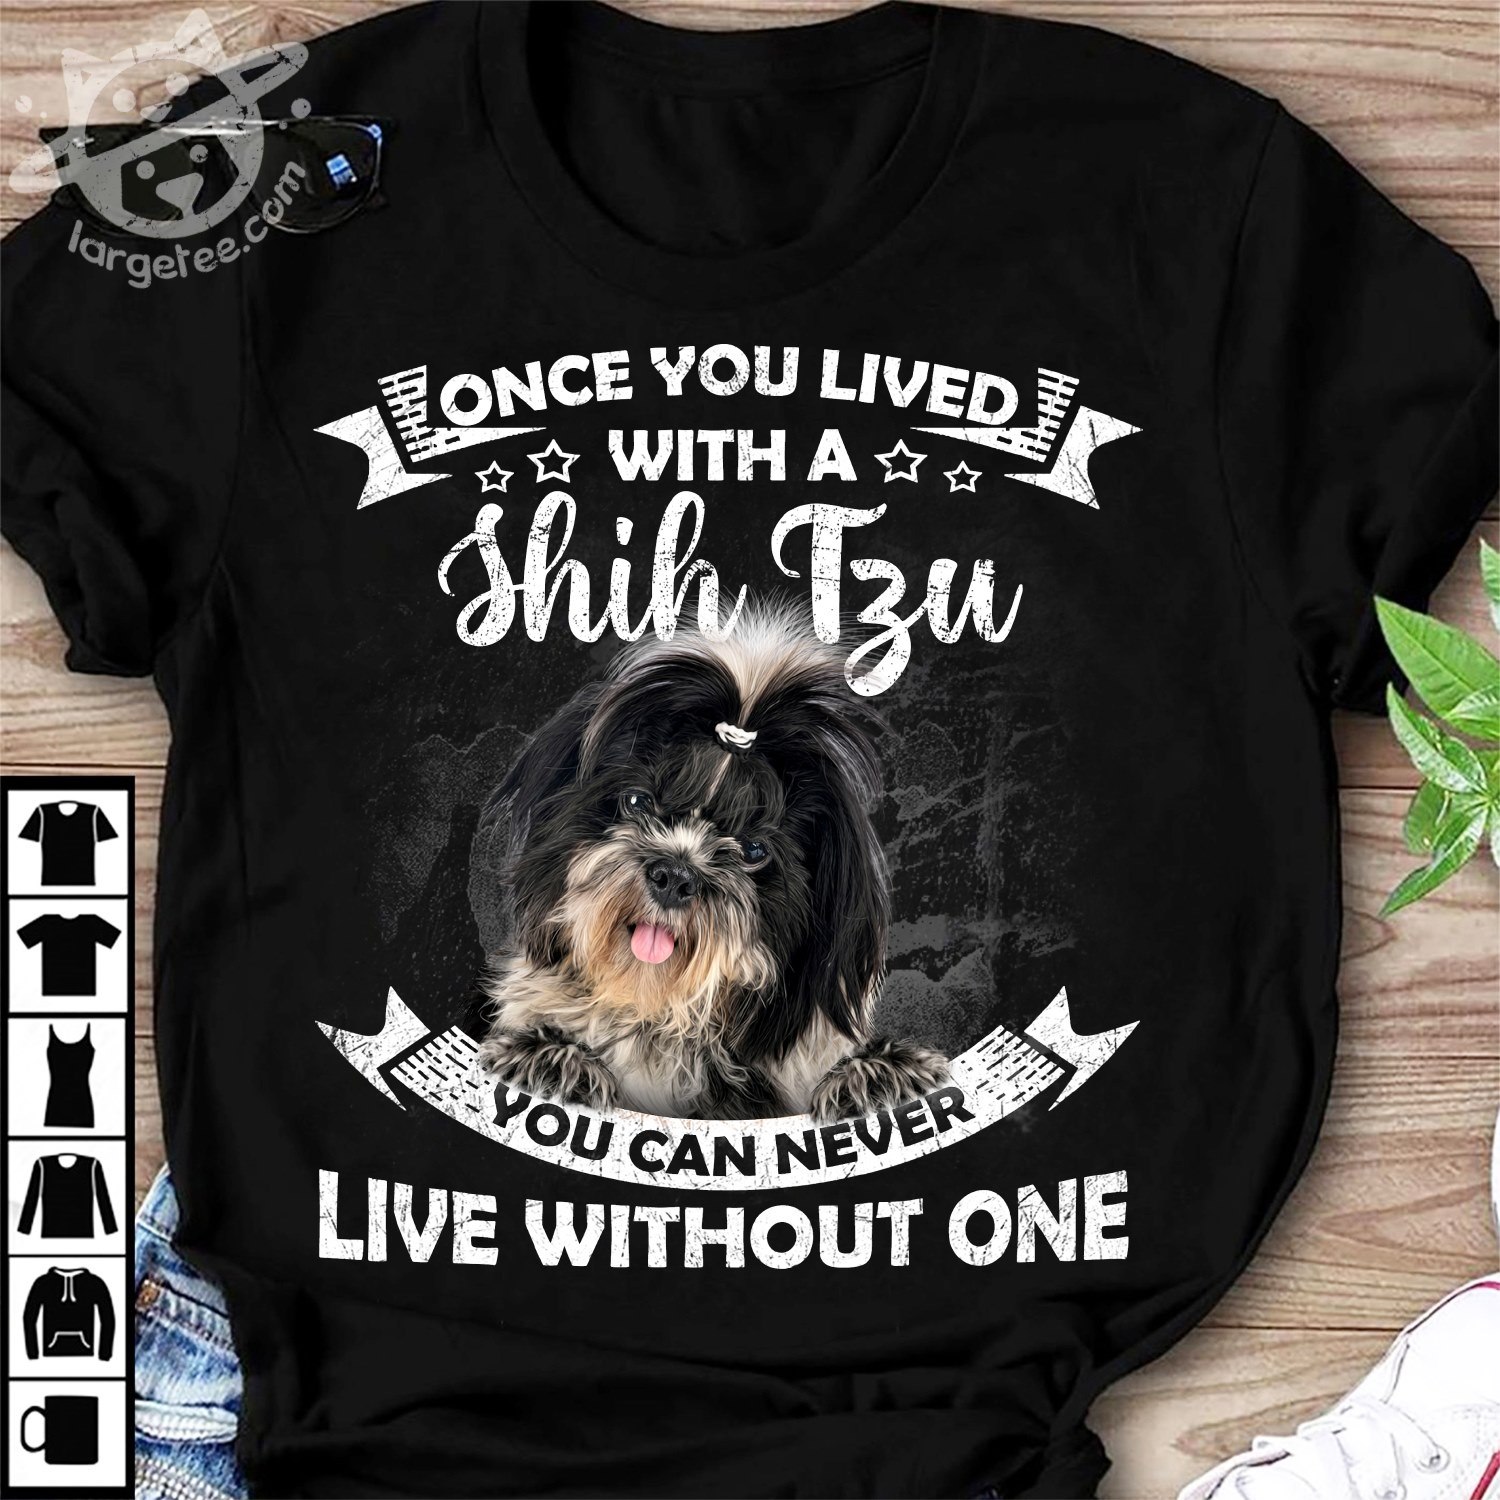 Once you lived with a Shih Tzu you can never live without one - Dog lover